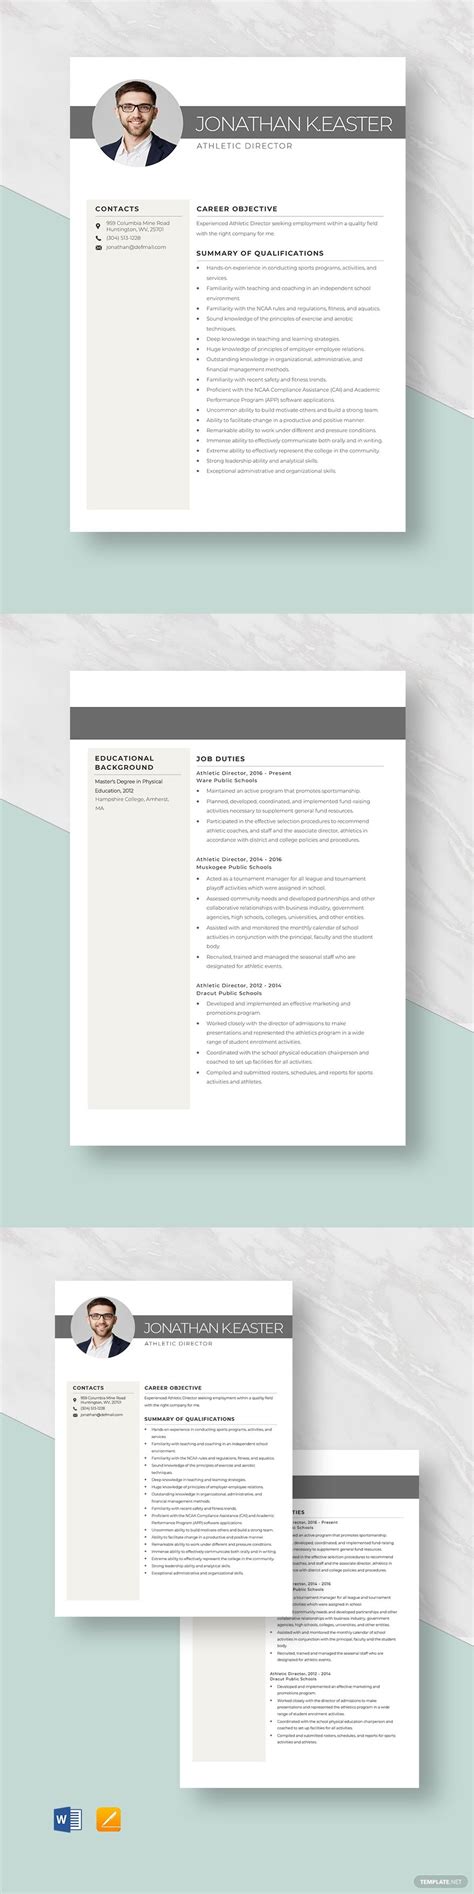 athletic director resume template   resume template templates